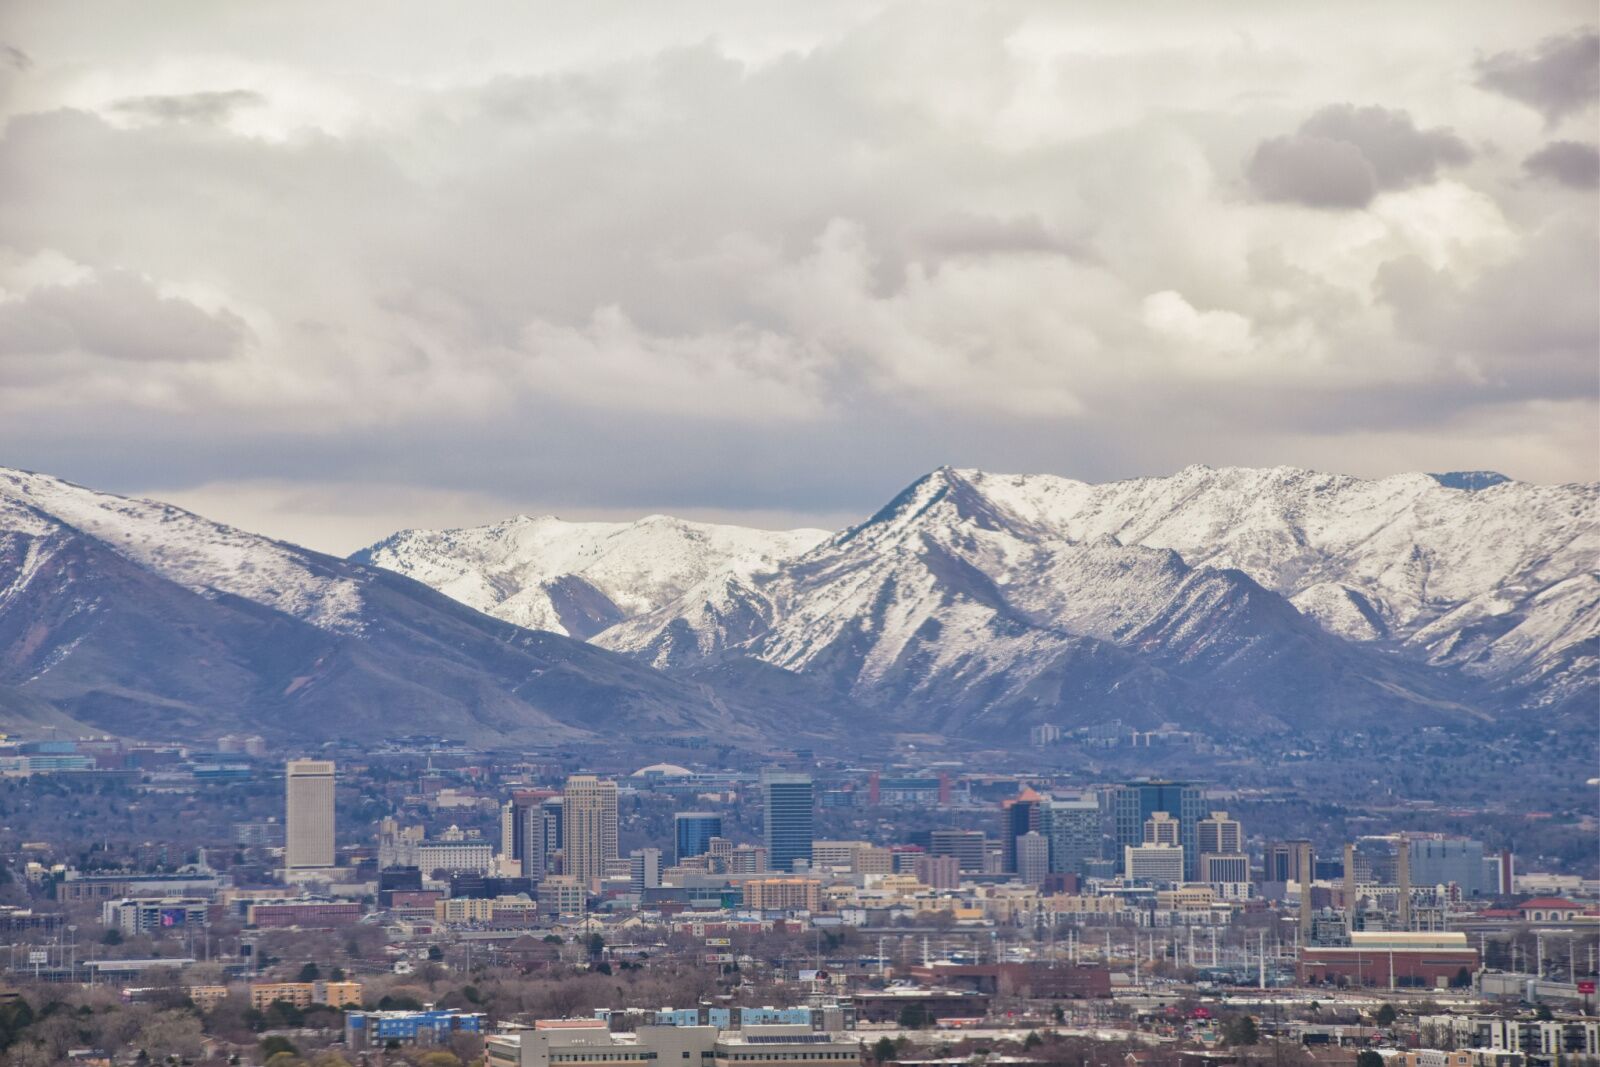 Salt Lake City with the mountains towering behind -- a good place for a ski trip